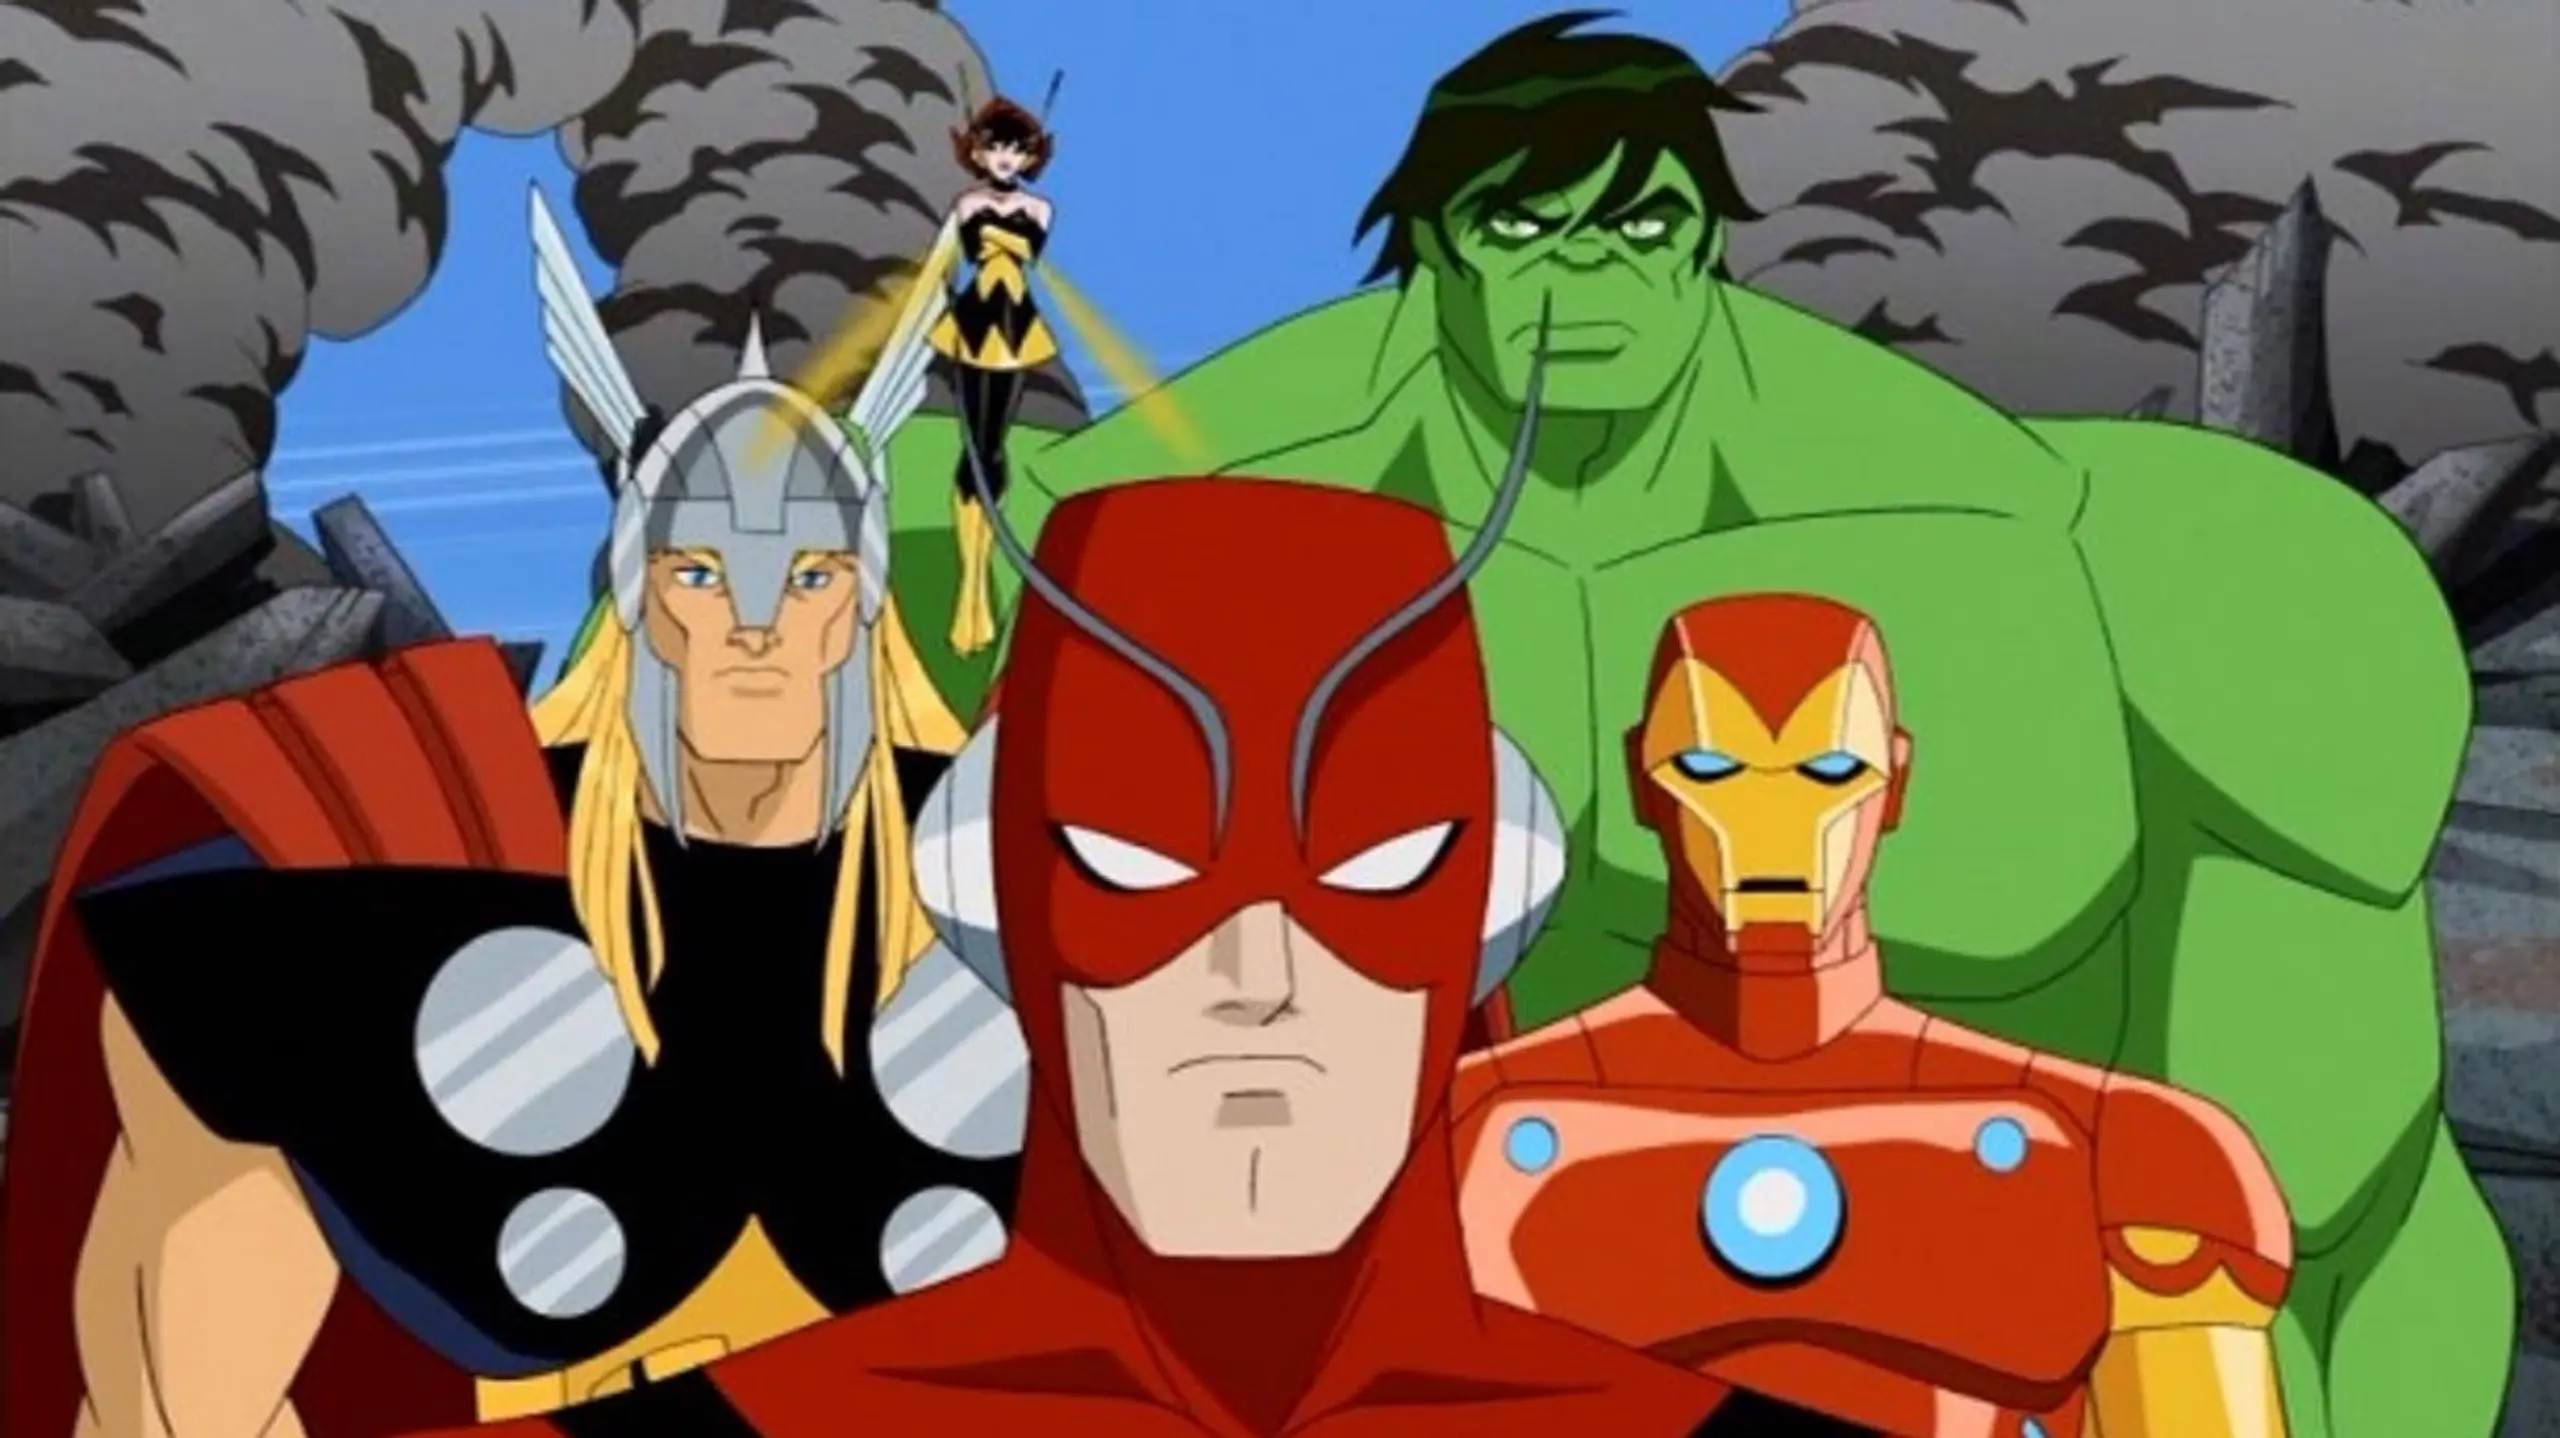 The Avengers: Earth's Mightiest Heroes - Prelude